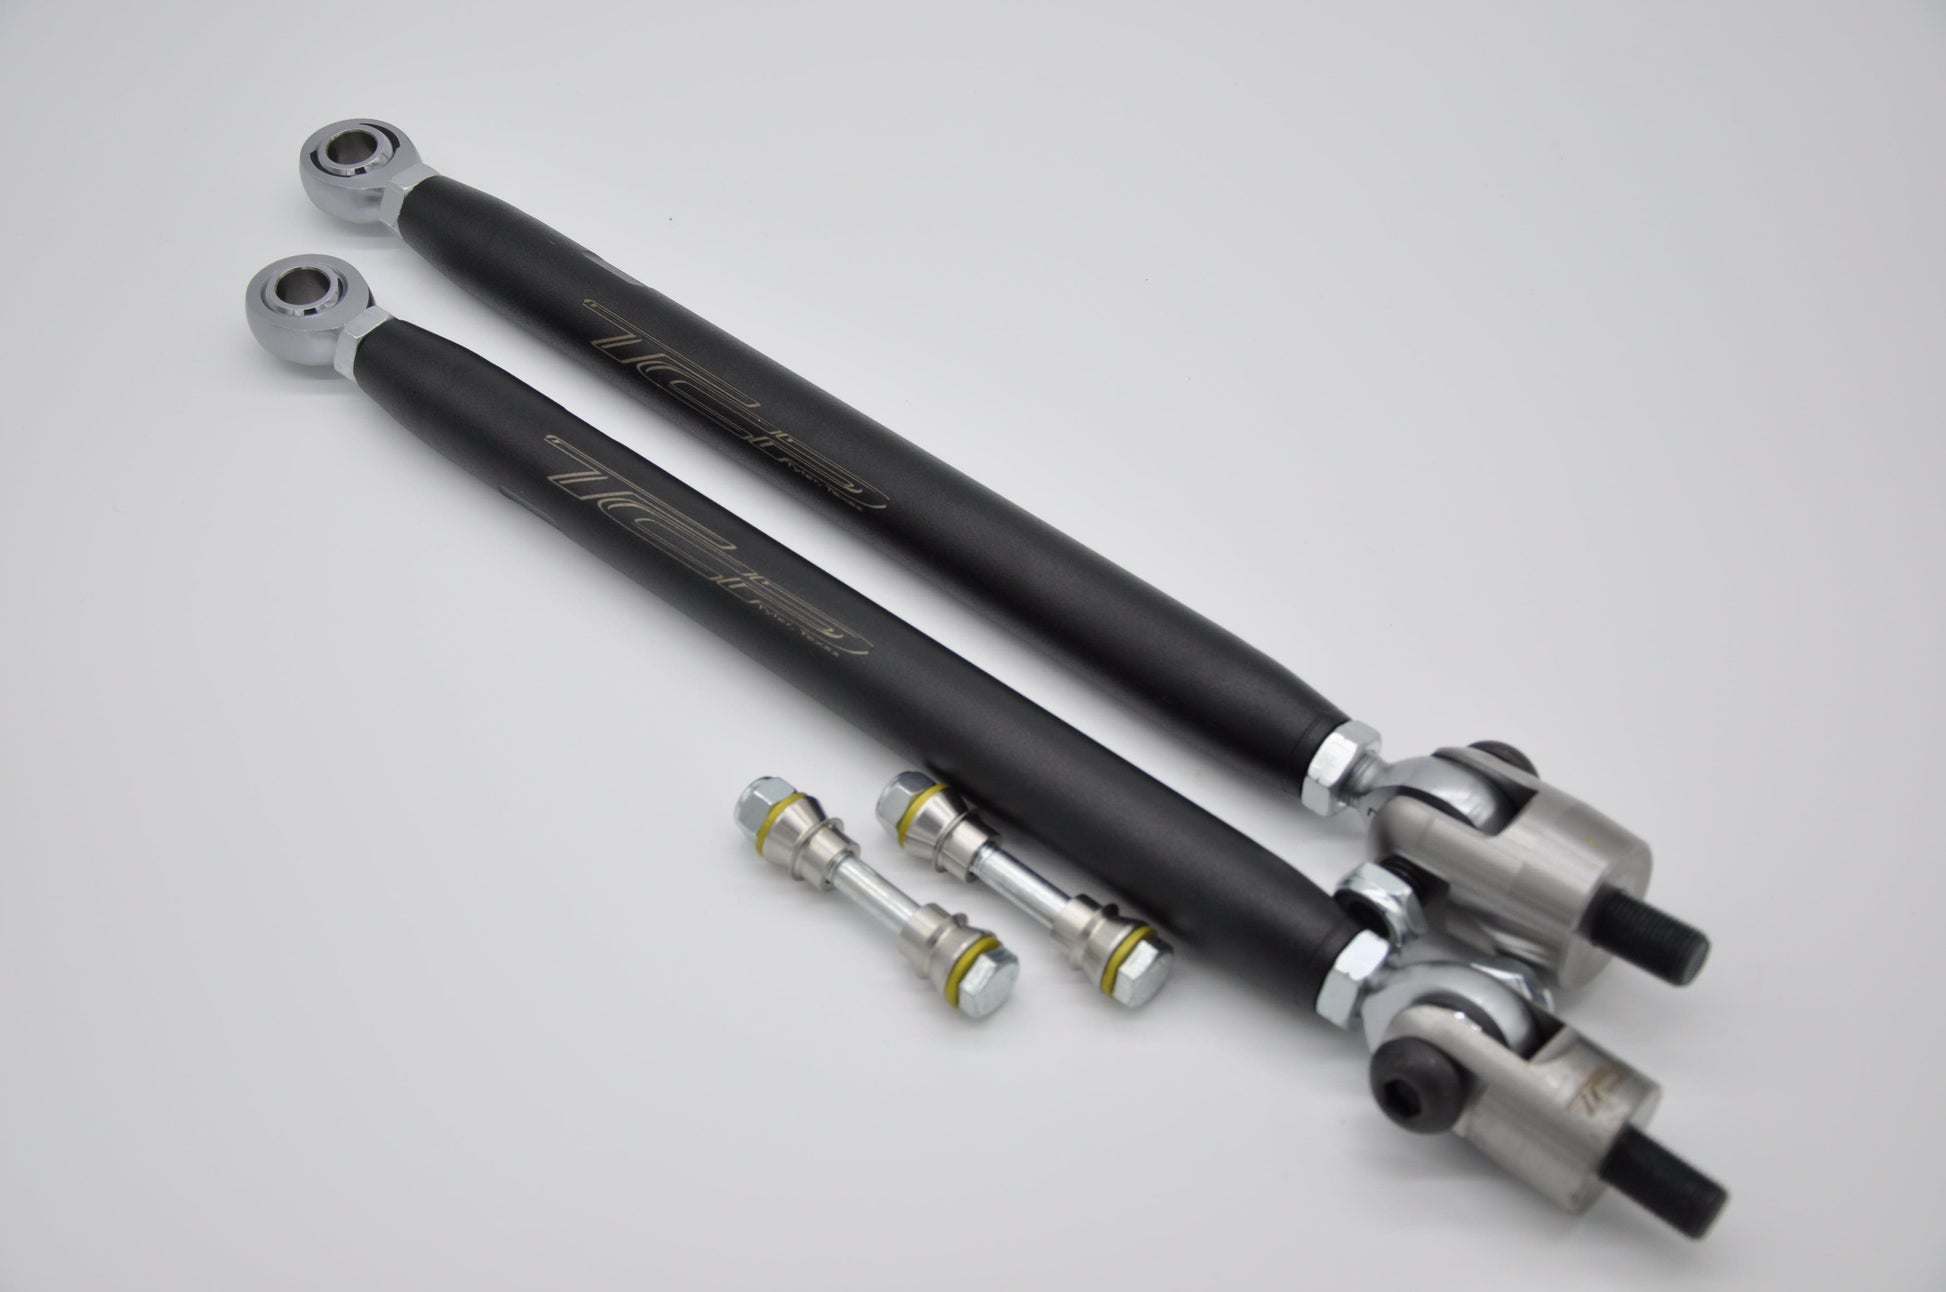 Heavy Duty Tie Rods, Rod Ends, Clevises and Tapered King Pins for Polaris OBS Ranger Steering Rack